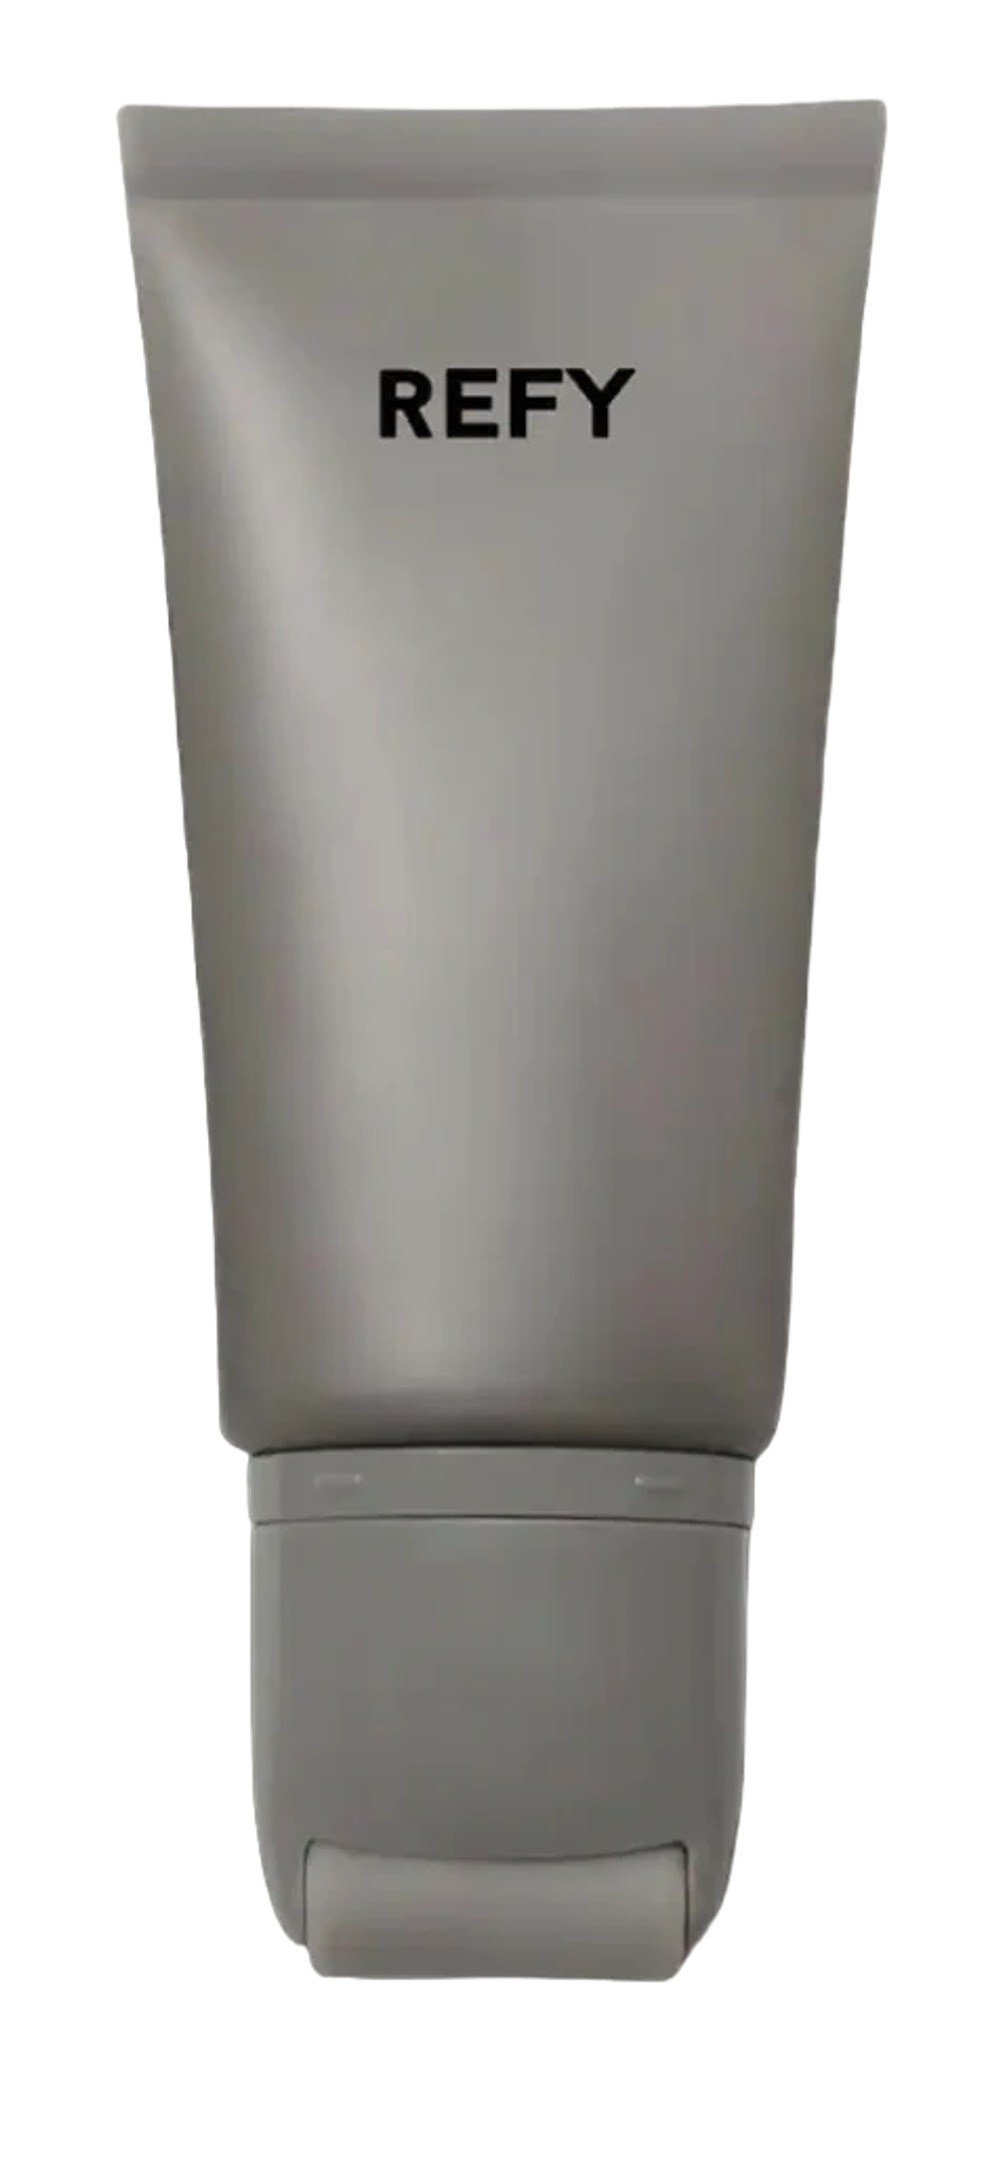 REFY Face Primer Glow And Sculpt